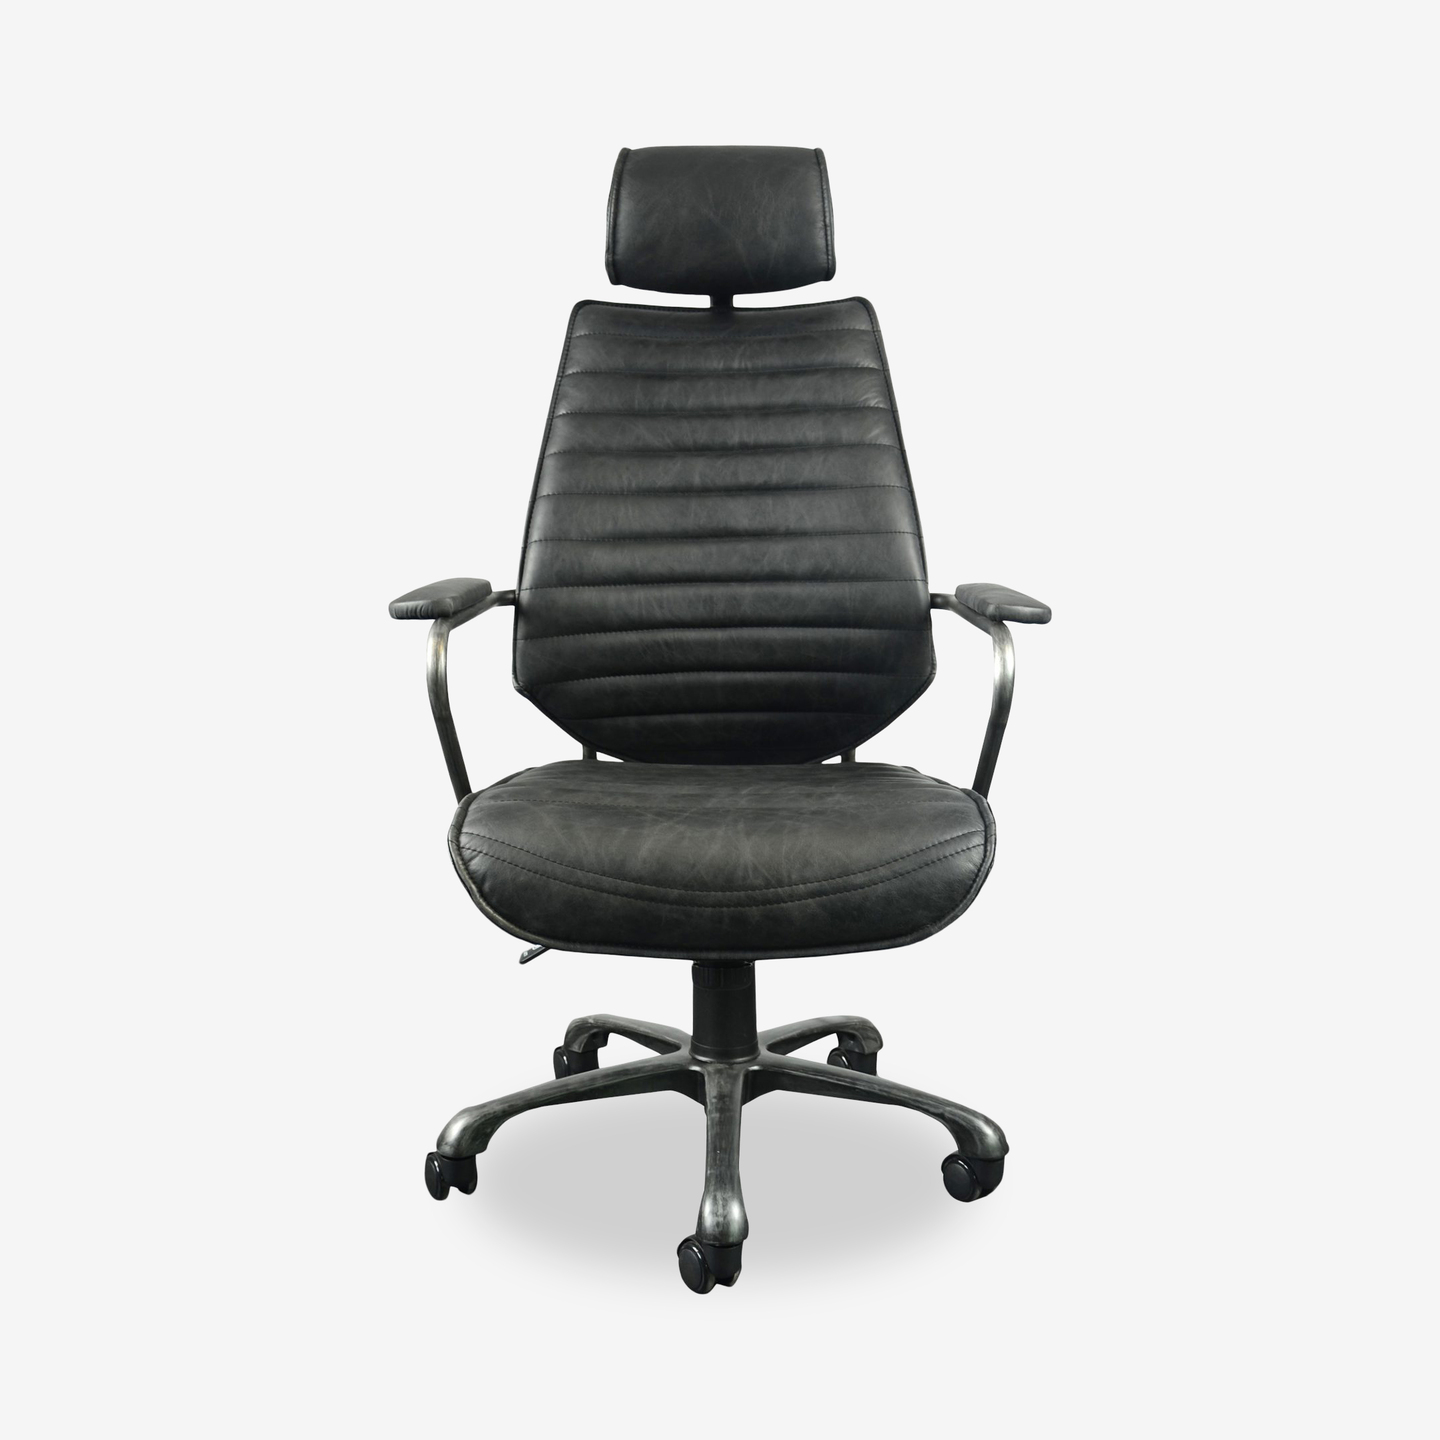 1087_Wolf-Executive-Office-Chair-Black_Front_2020